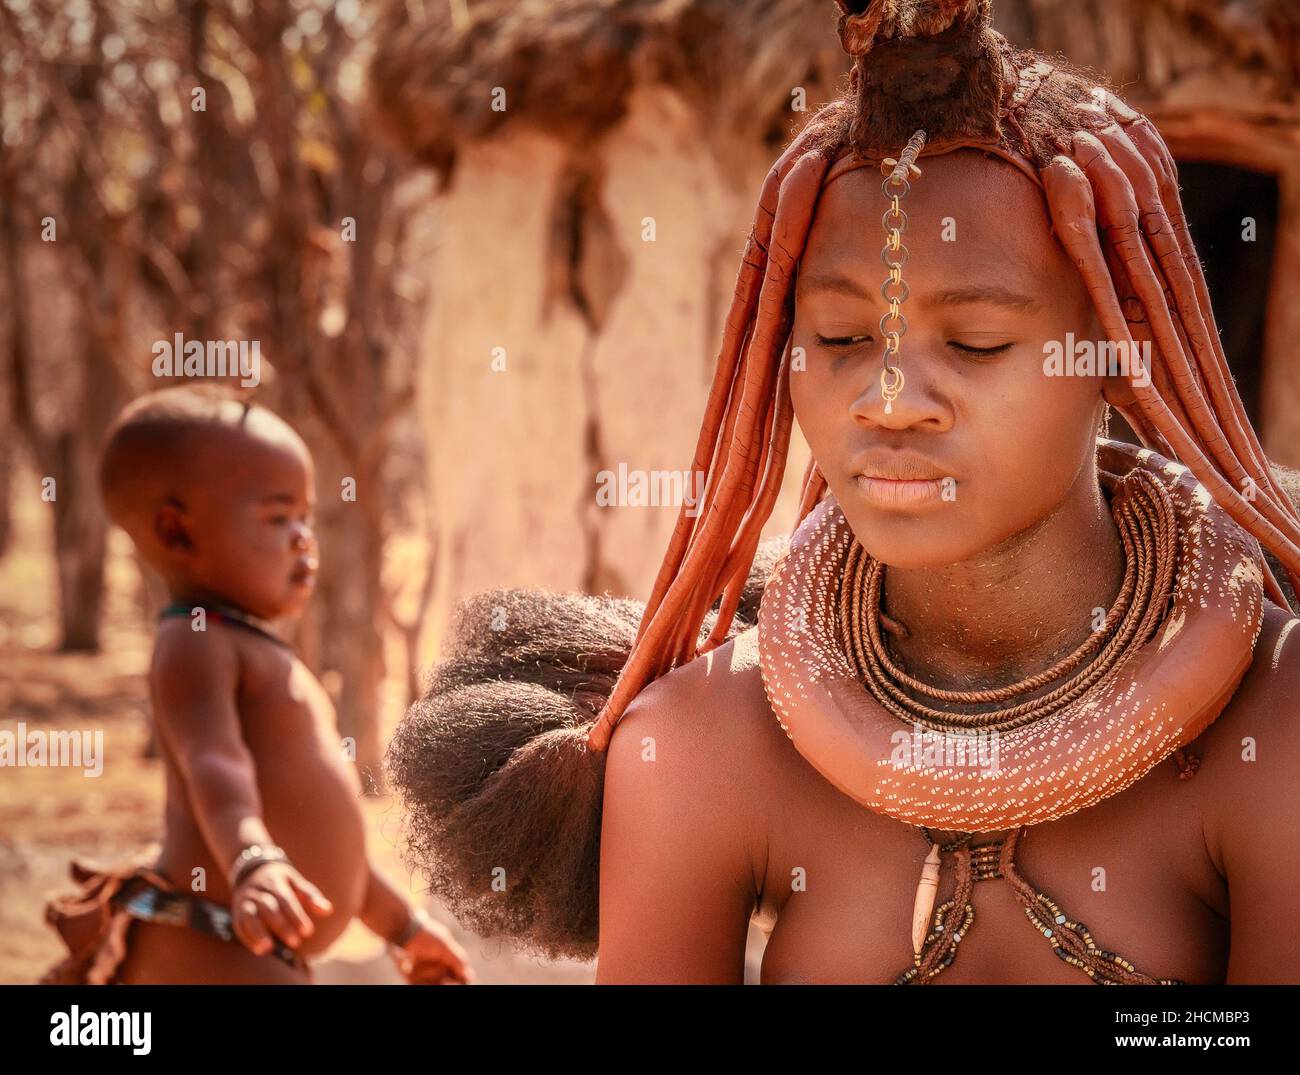 An African woman wearing traditional Himba tribal jewelry and hairstyle with her young child in the background in rural Namibia. Stock Photo